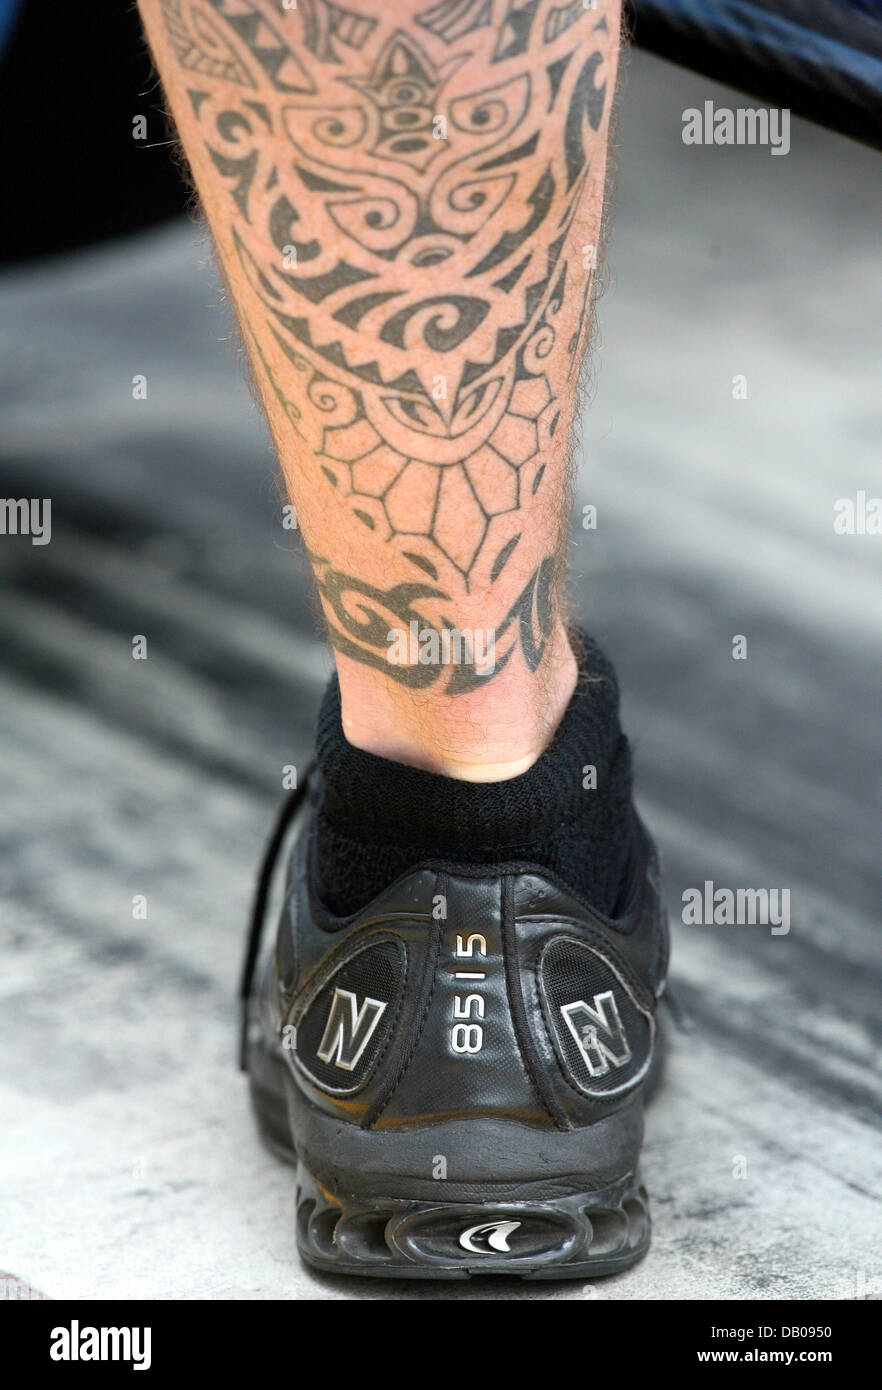 The tattoed calf of a mechanic pictured in the pit lane during Practice 2 at the Nurburgring, Germany, 20 July 2007. The 2007 Formula 1 Grand Prix of Europe that is held on 22 July. Photo: Roland Weihrauch Stock Photo